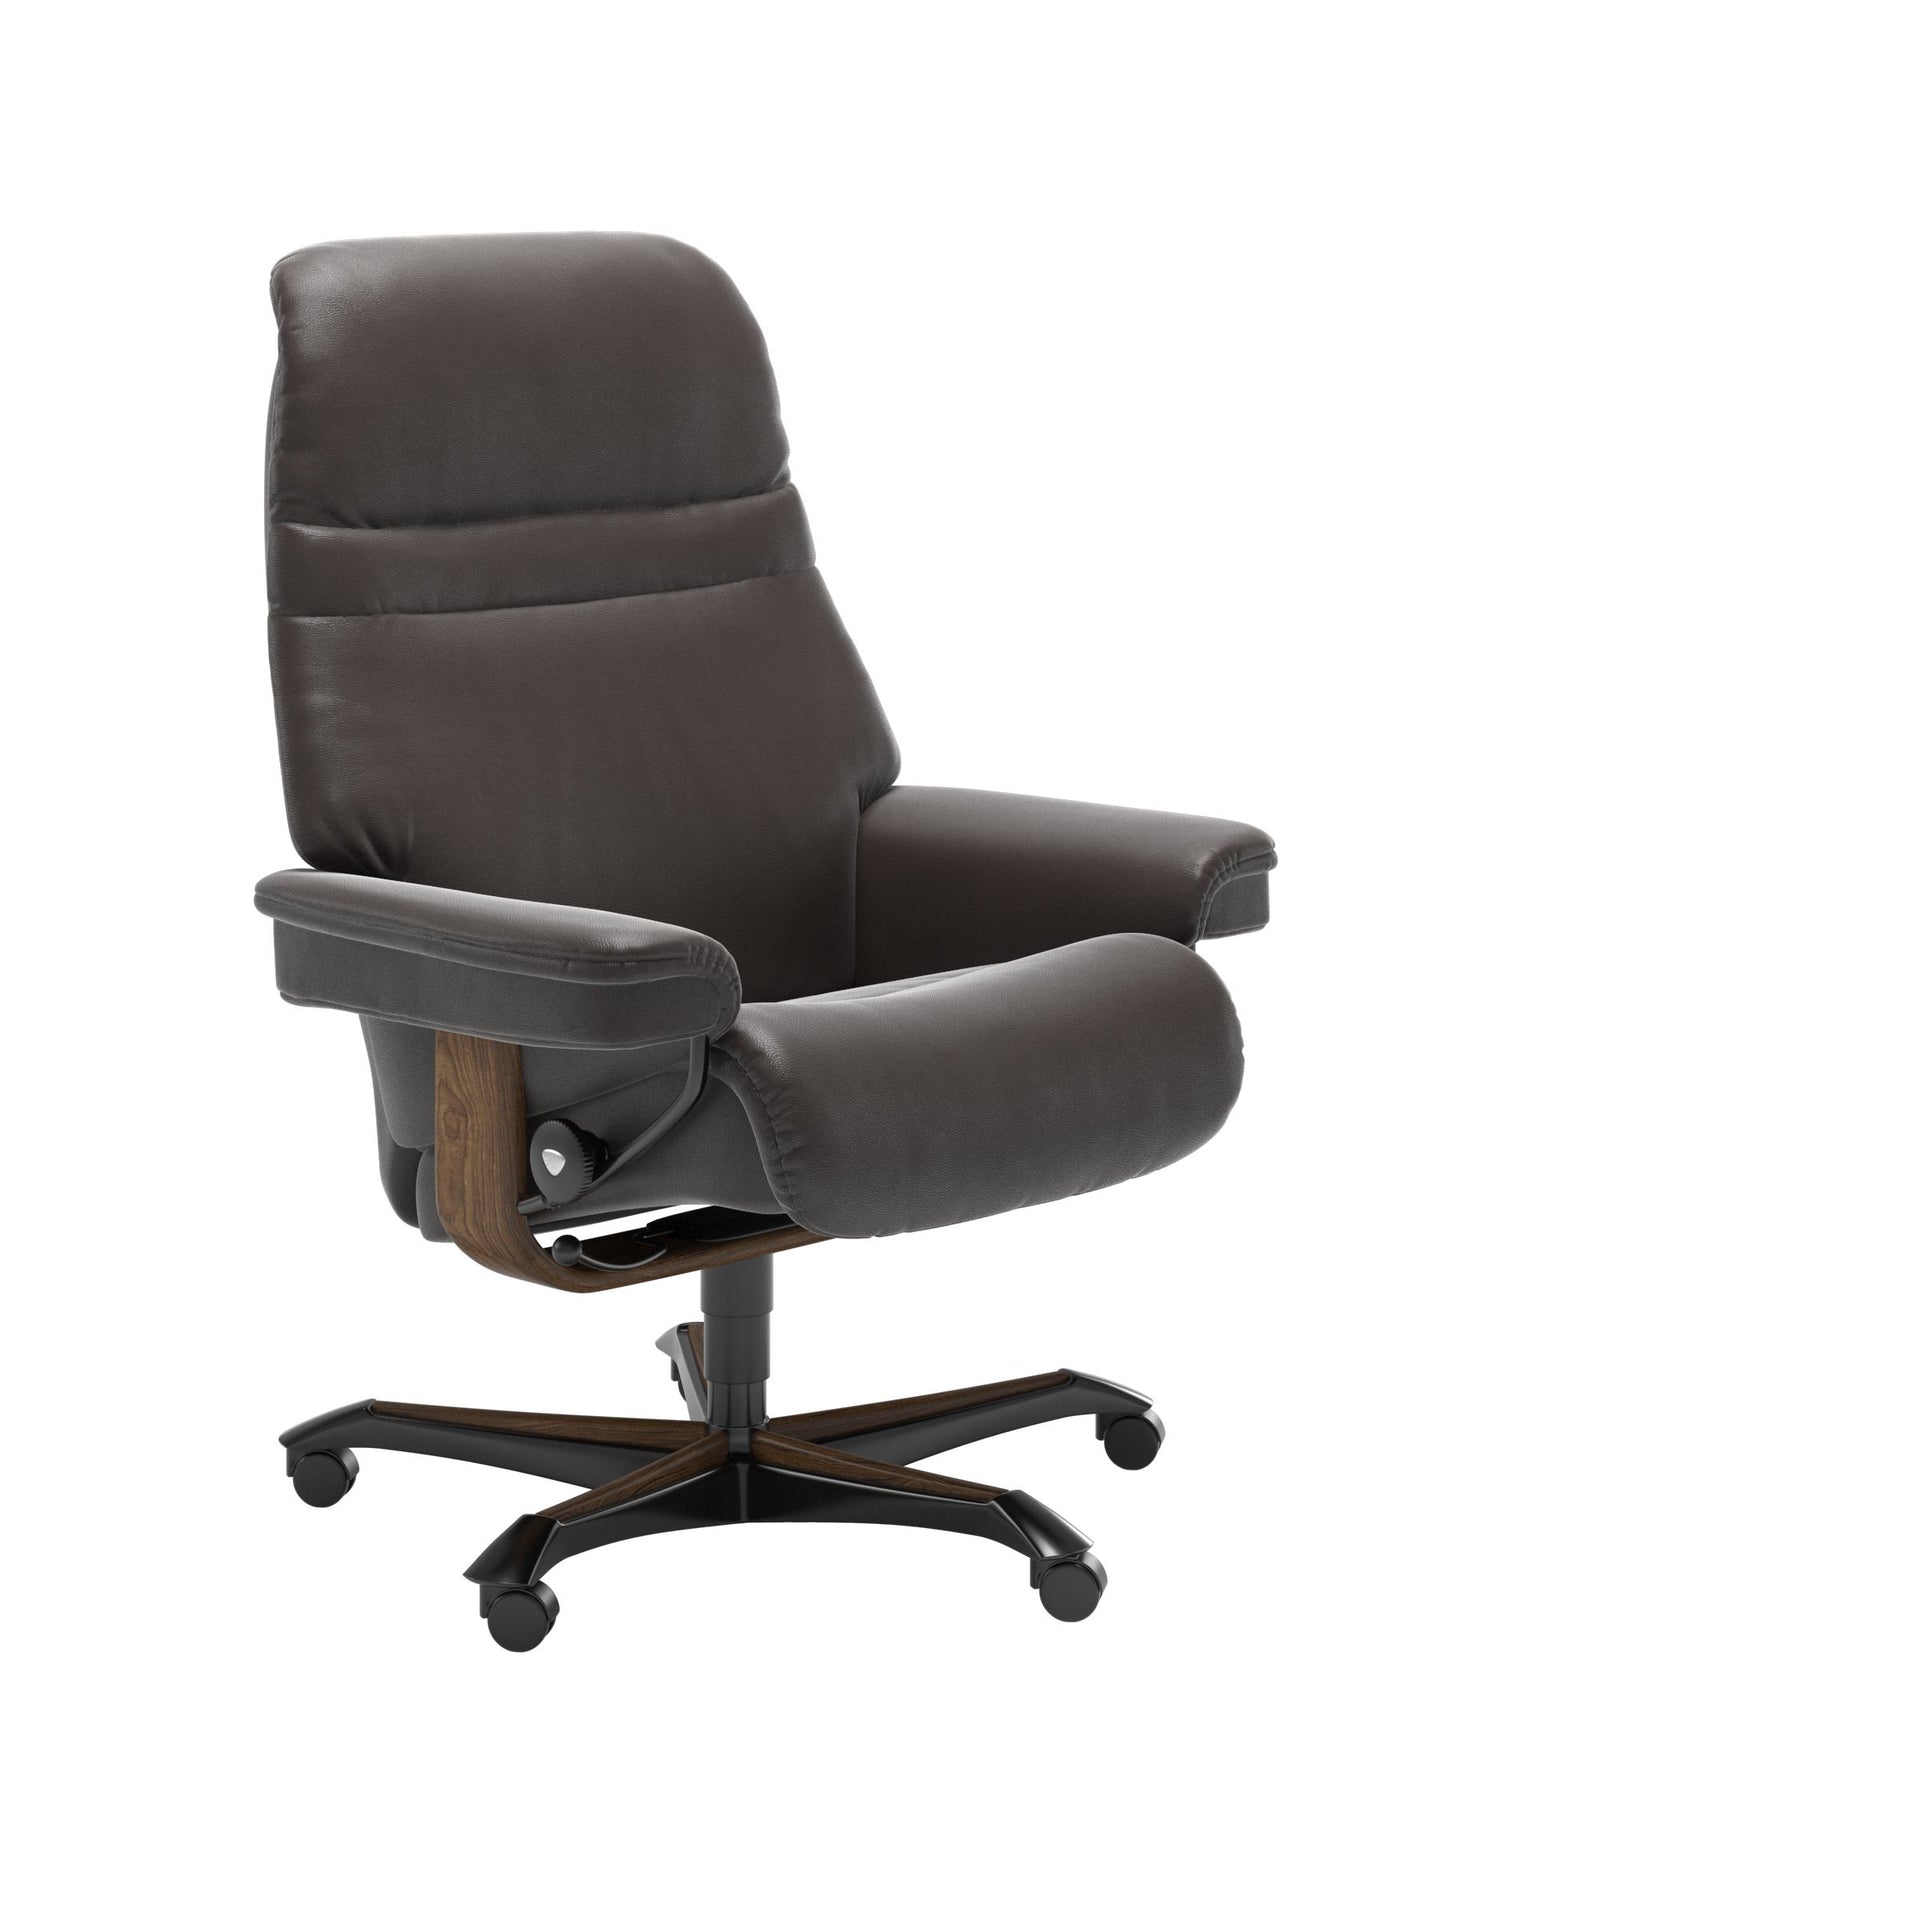 Stressless Sunrise Office Chair in front view